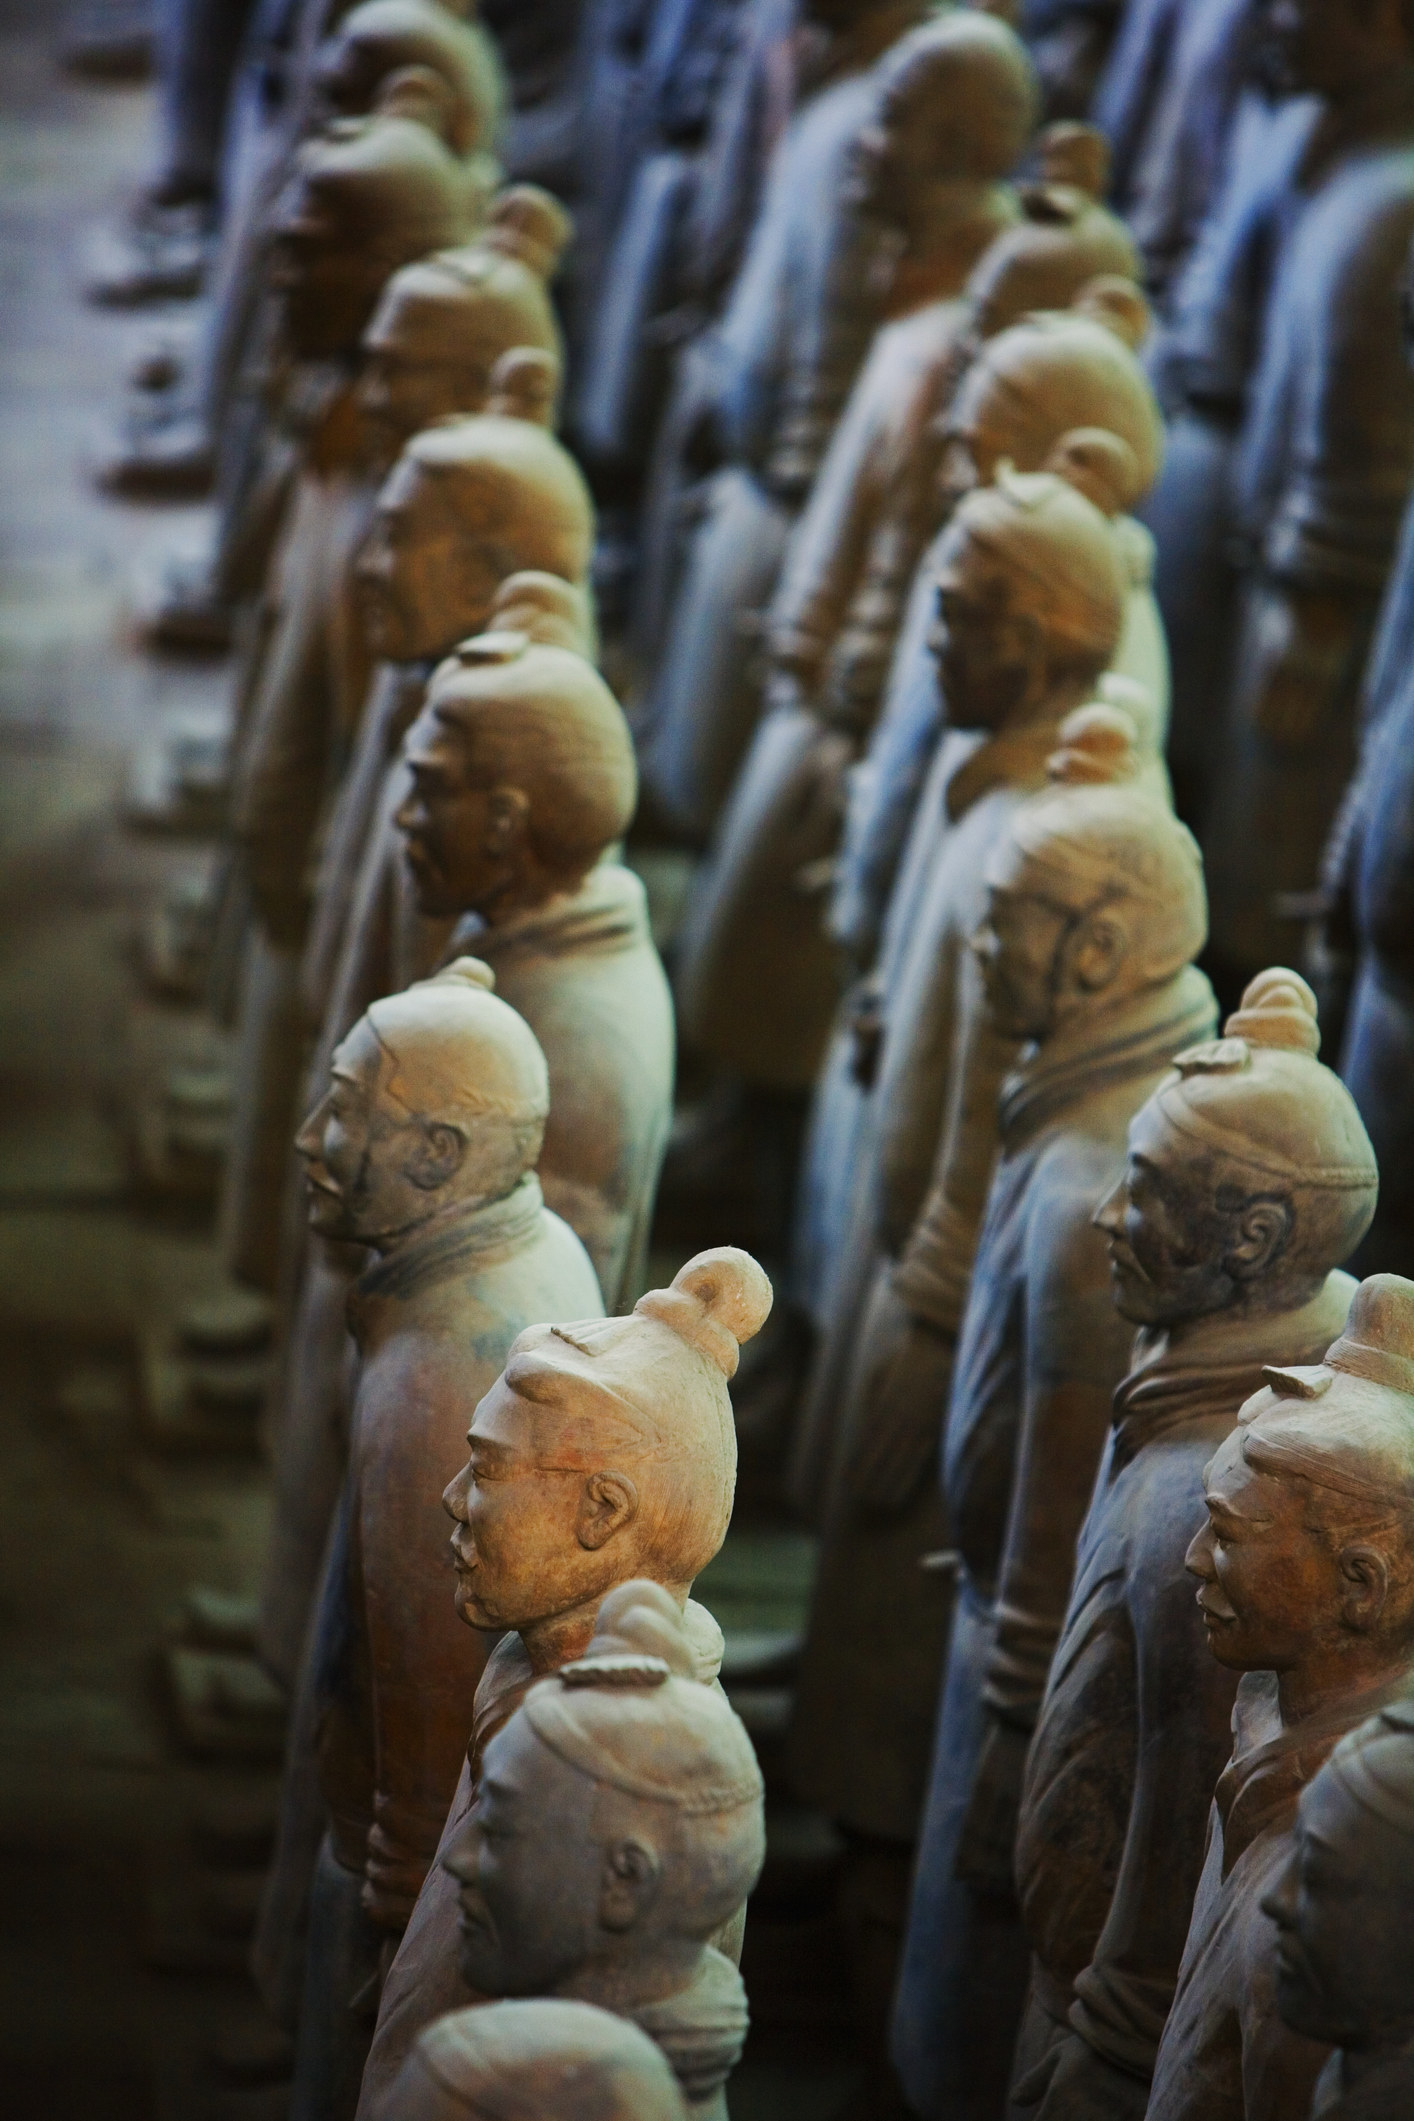 Statues of terracotta warriors in rows